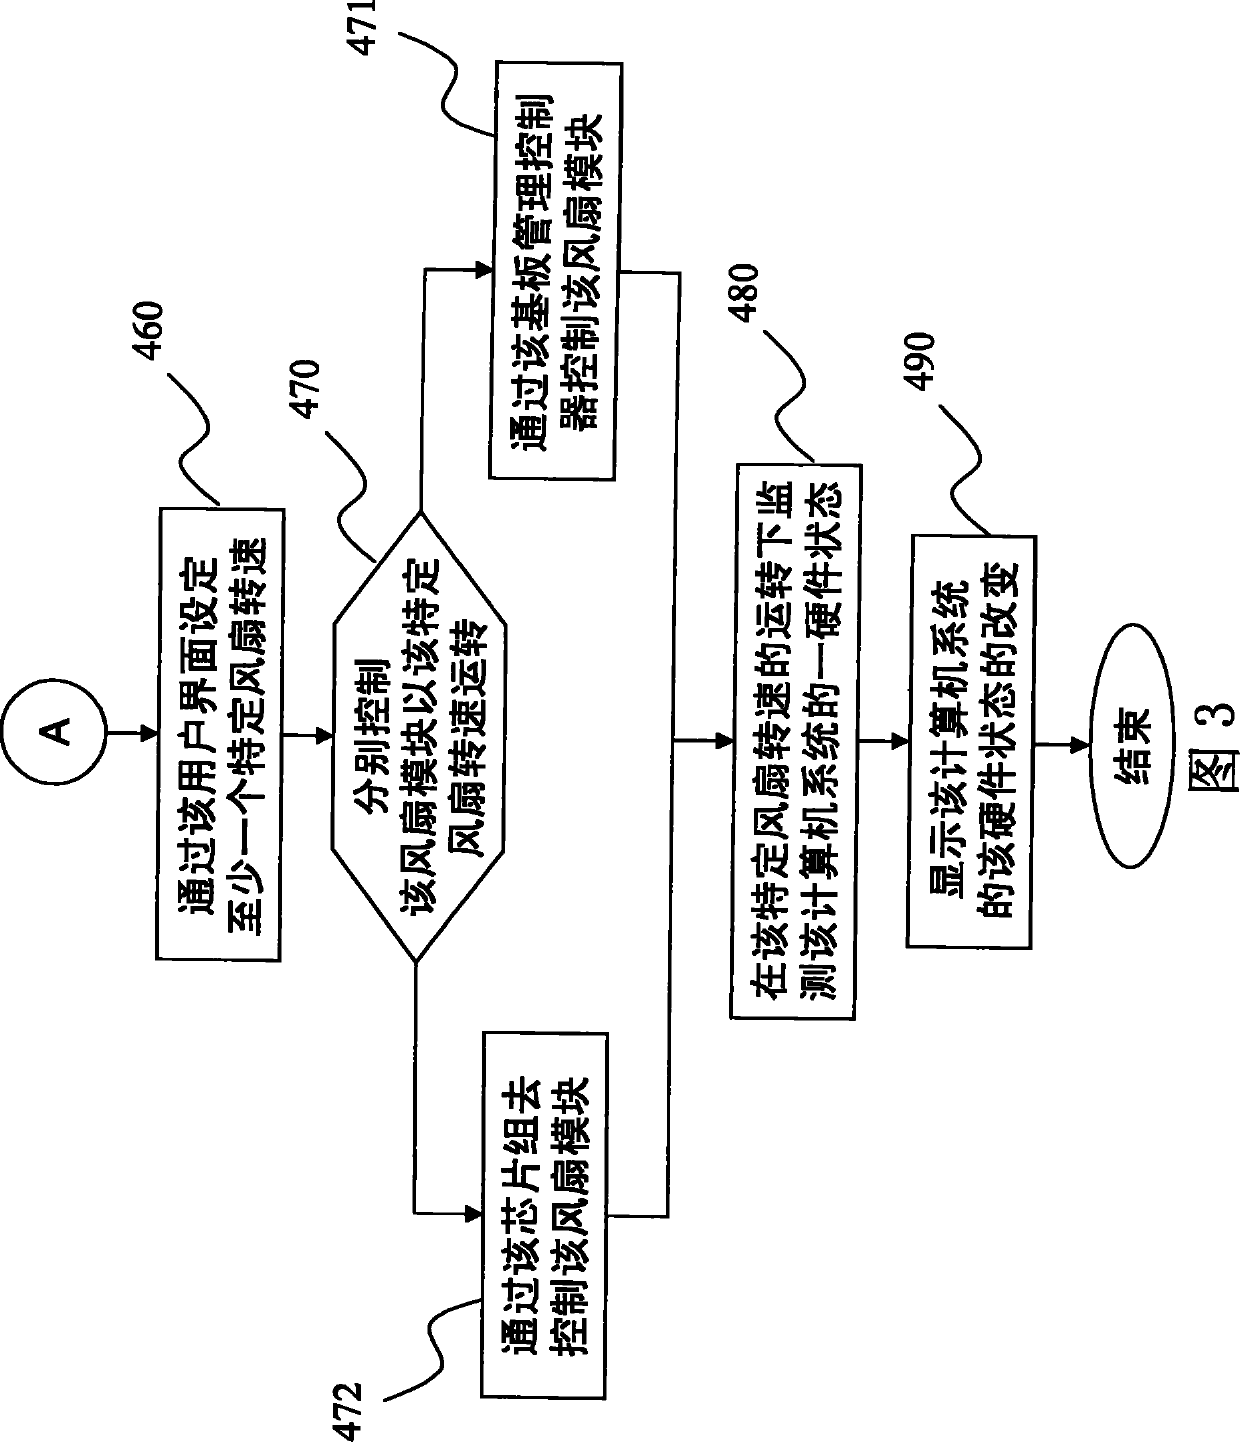 System hardware monitoring and simulation testing module and method thereof